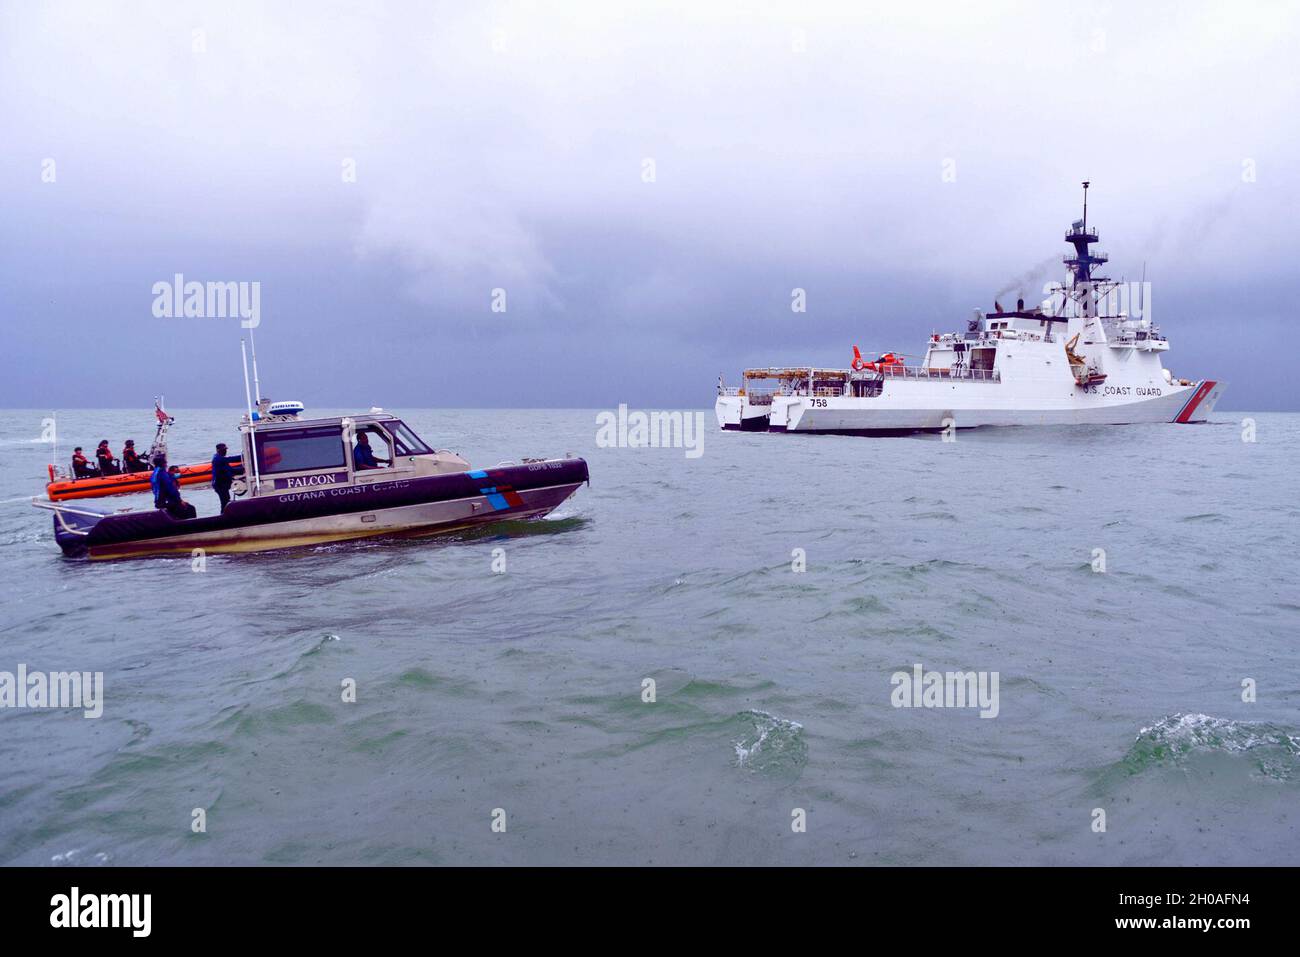 U.S. Coast Guard and Guyana Coast Guard small boats patrol behind the USCGC Stone (WMSL 758) off the coast of Guyana on Jan. 9, 2021. The two countries entered a bilateral agreement on Sep. 18, 2020, to cooperate in suppressing illegal maritime activity in Guyana’s waters. Stock Photo